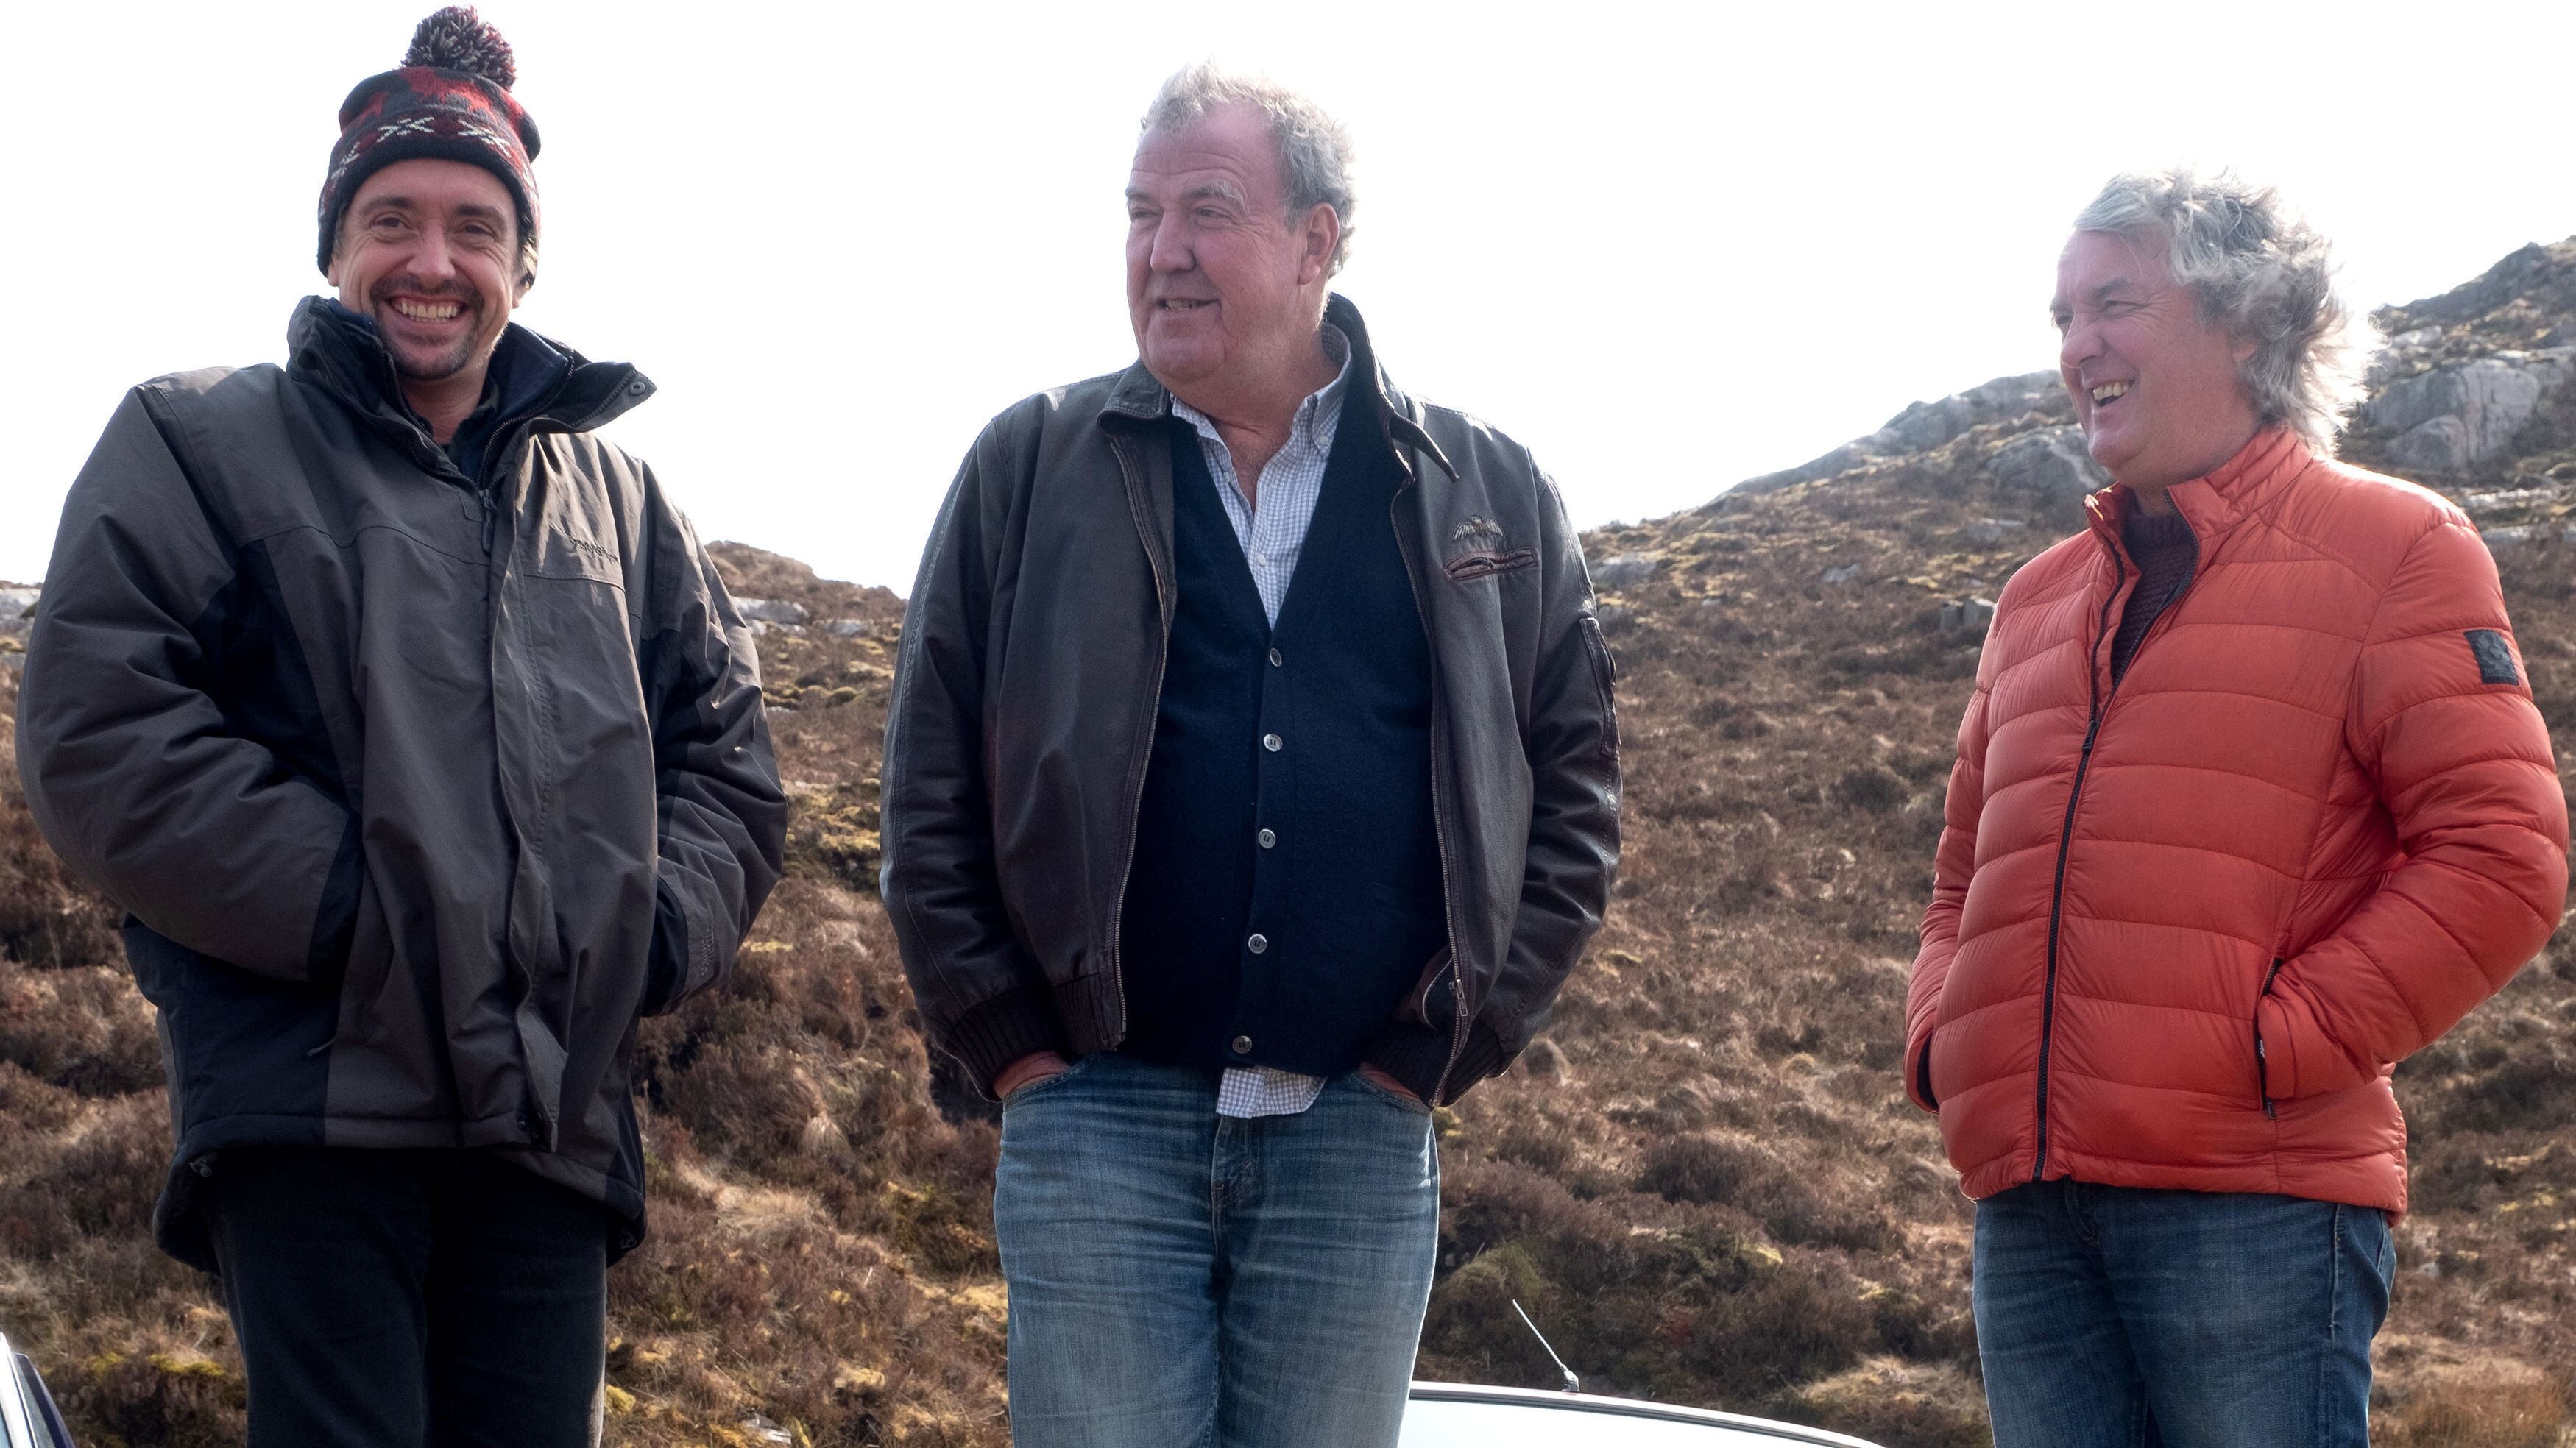 James May talks about recording the final voiceover for The Grand Tour